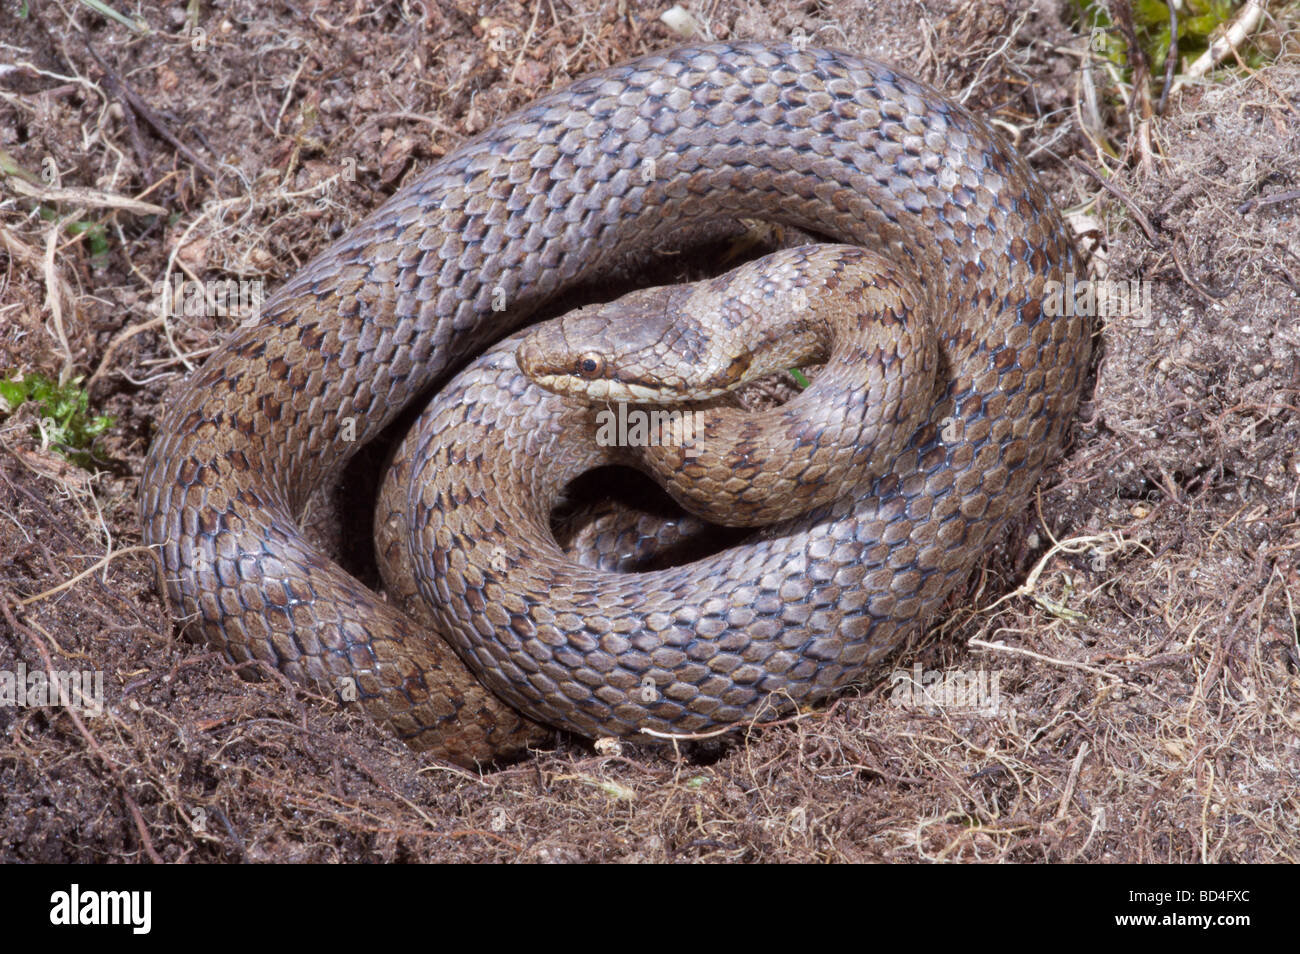 Smooth Snake (Coronella austriaca). Rarest of the three snake species known to be in the British Isles. Restricted to heathlands in southern counties. Stock Photo